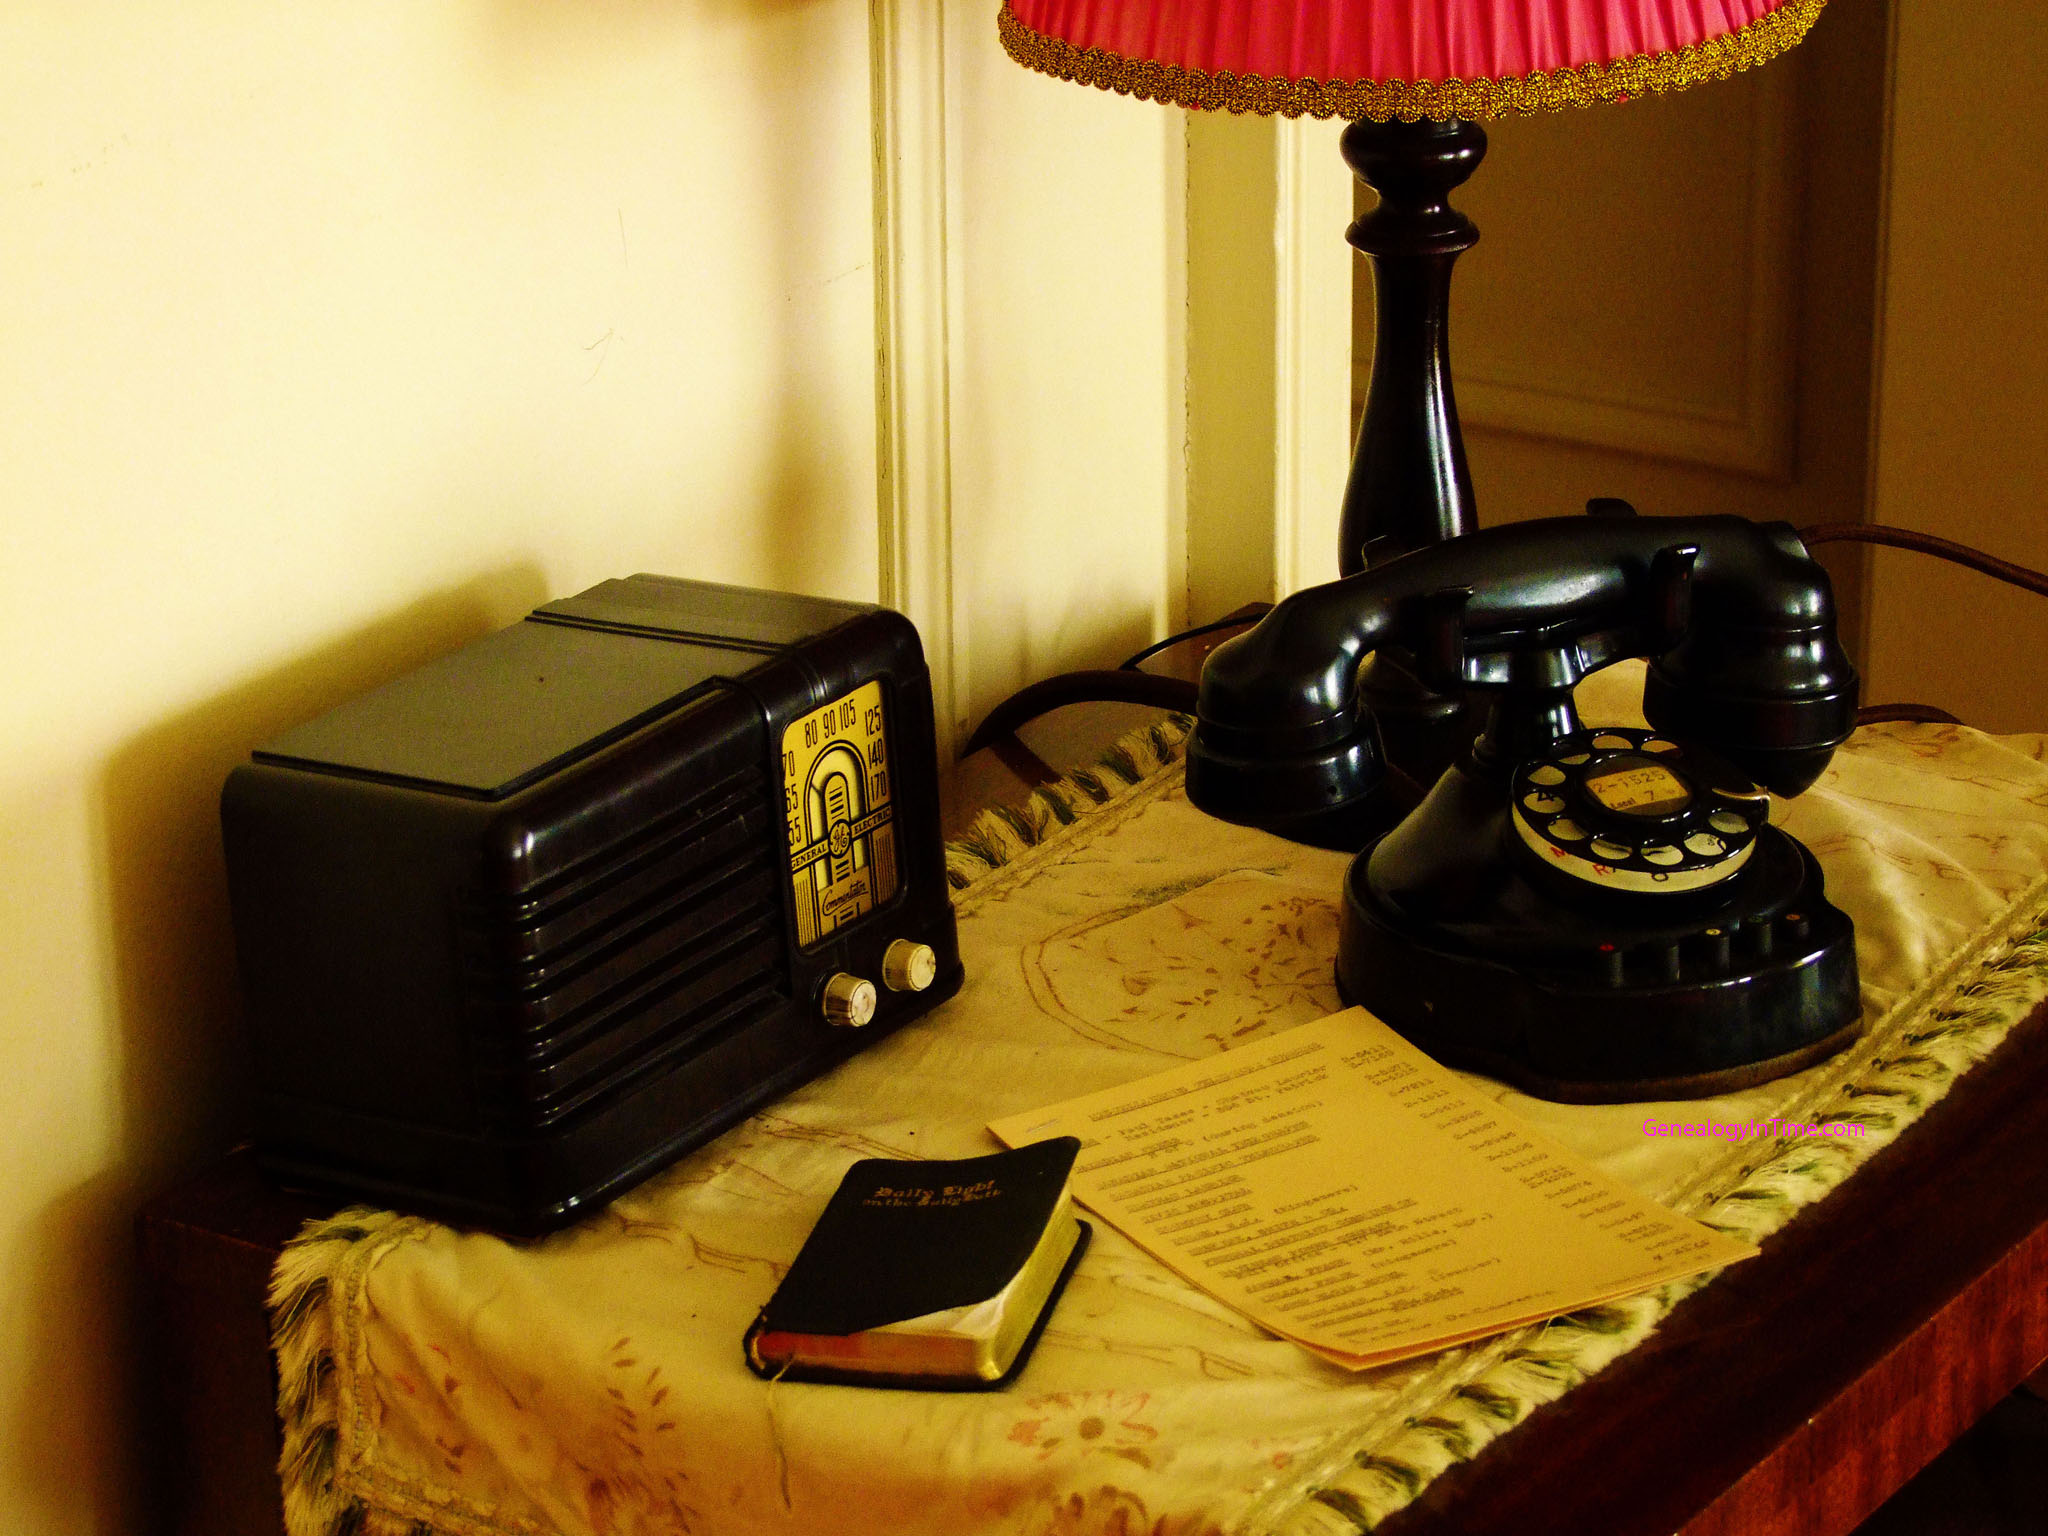 1930s Sidetable With Antique Phone And Radio